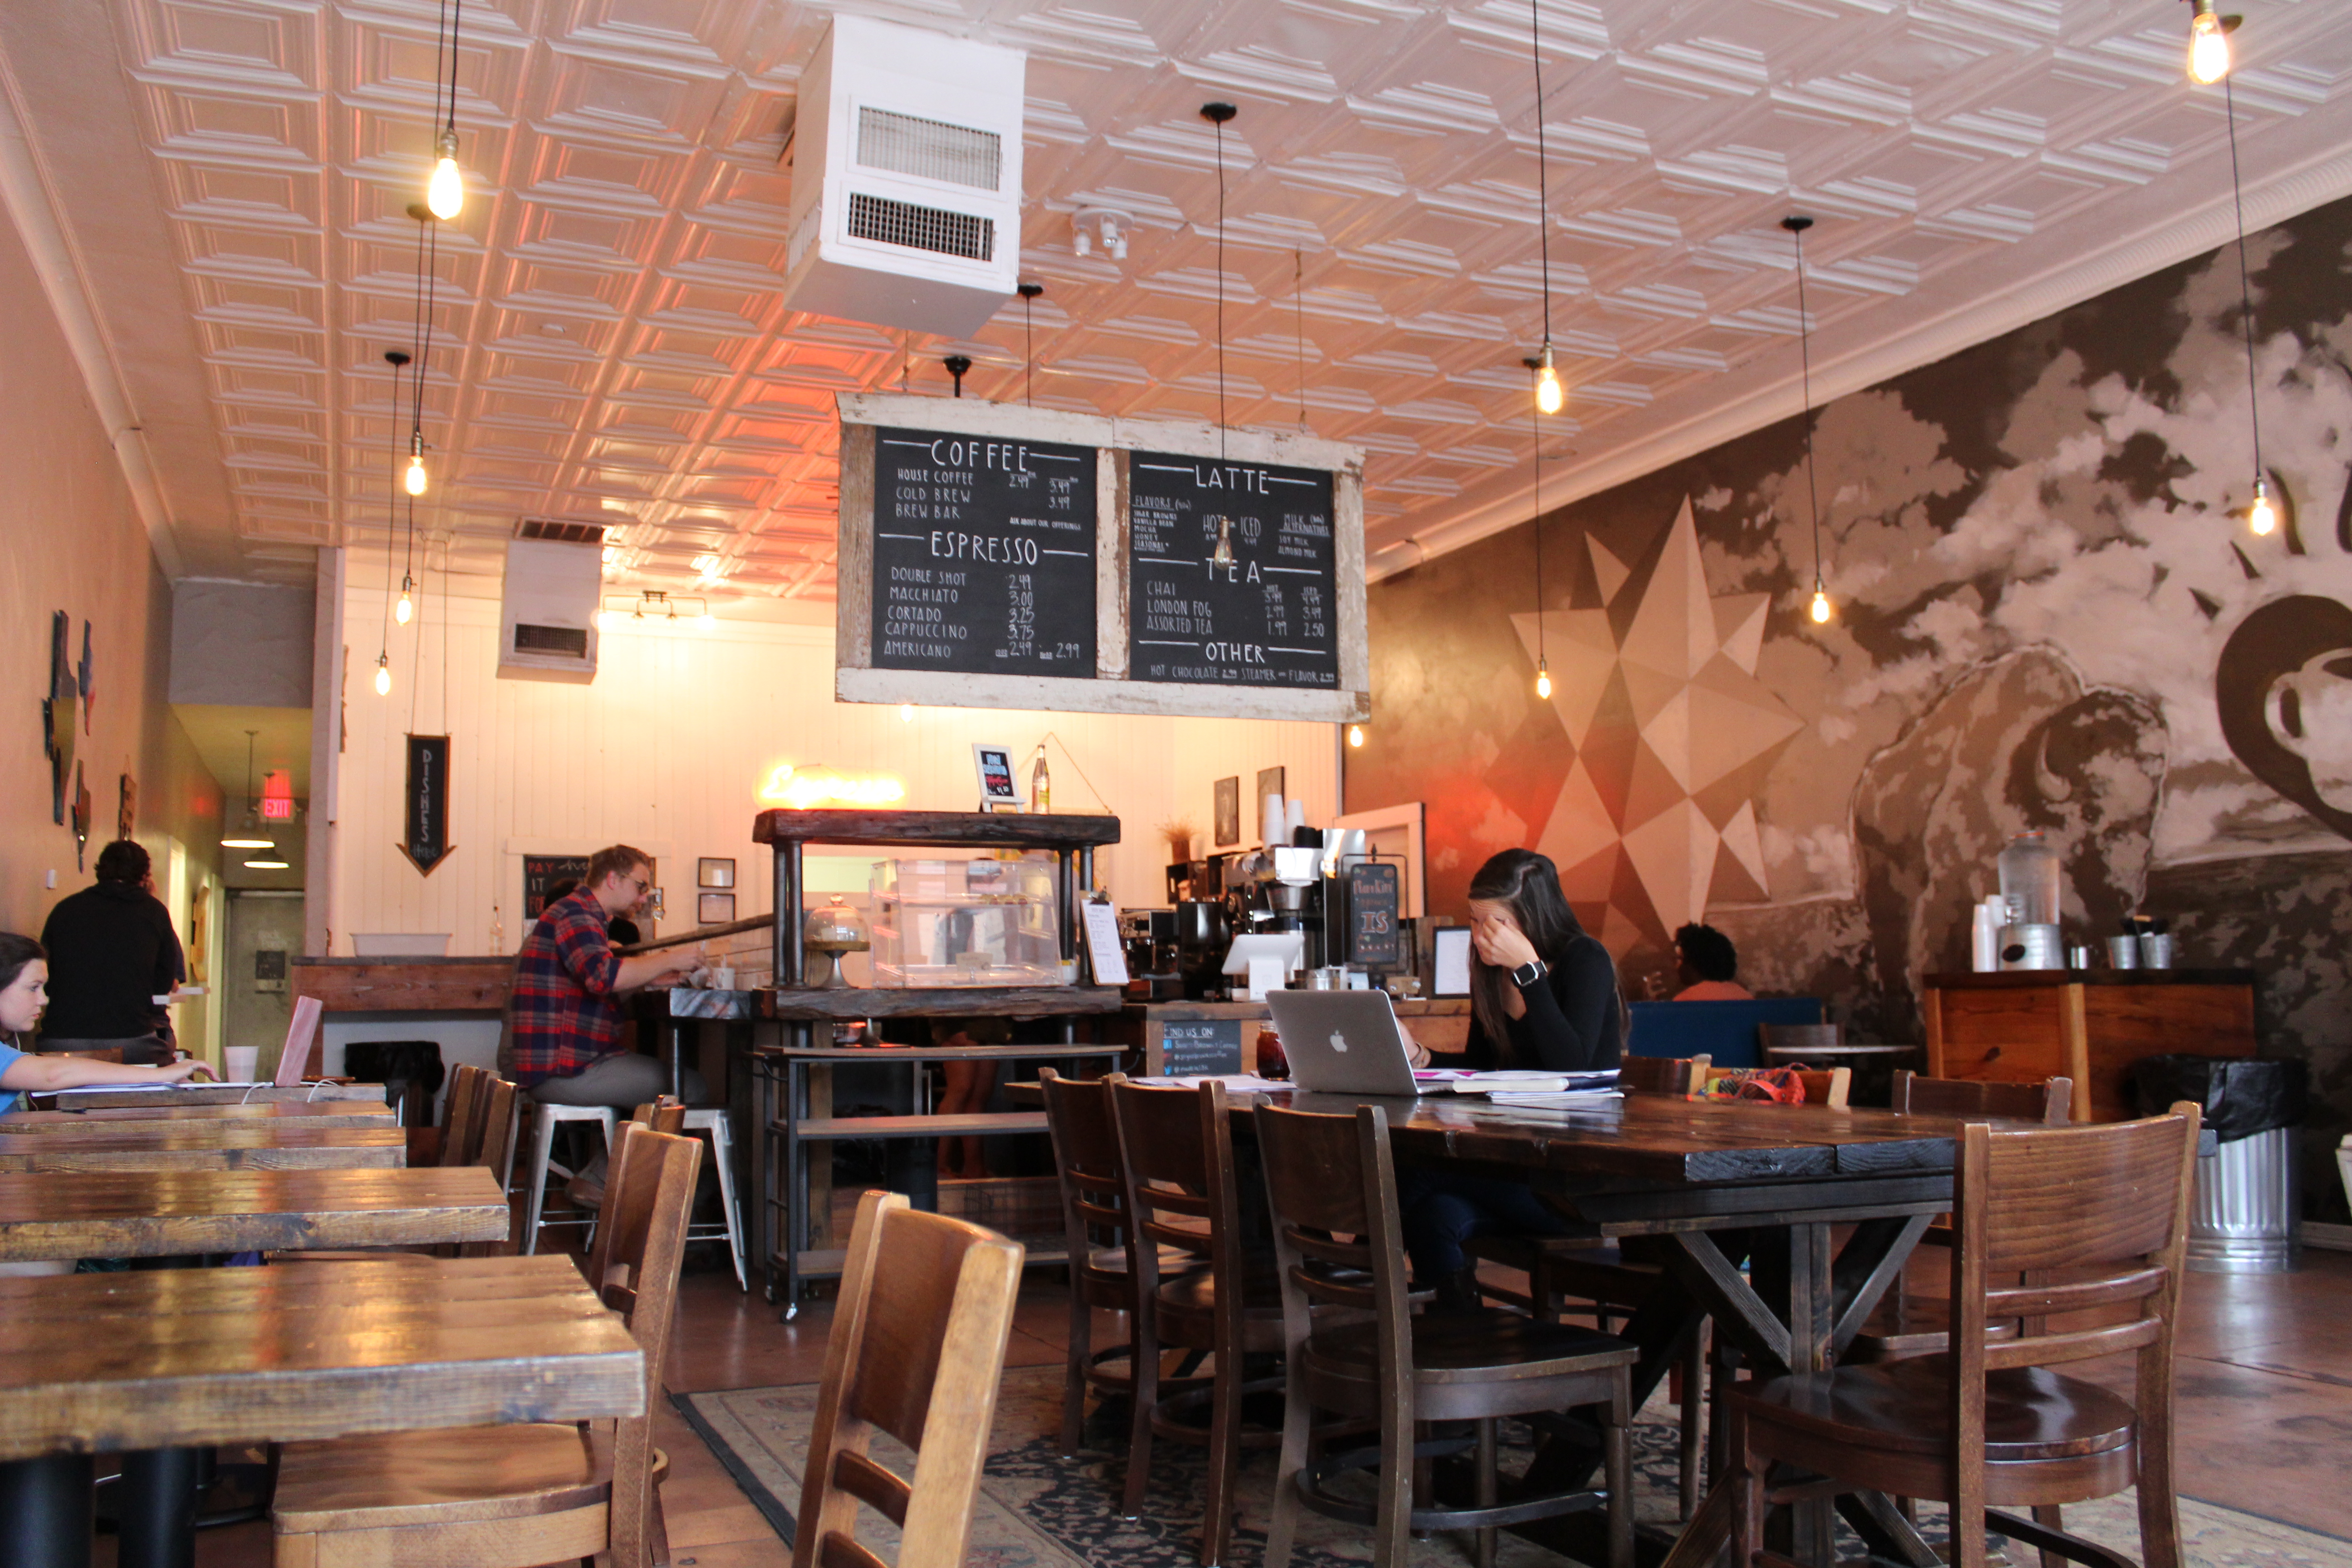 Lubbock coffee shops provide study atmosphere for students